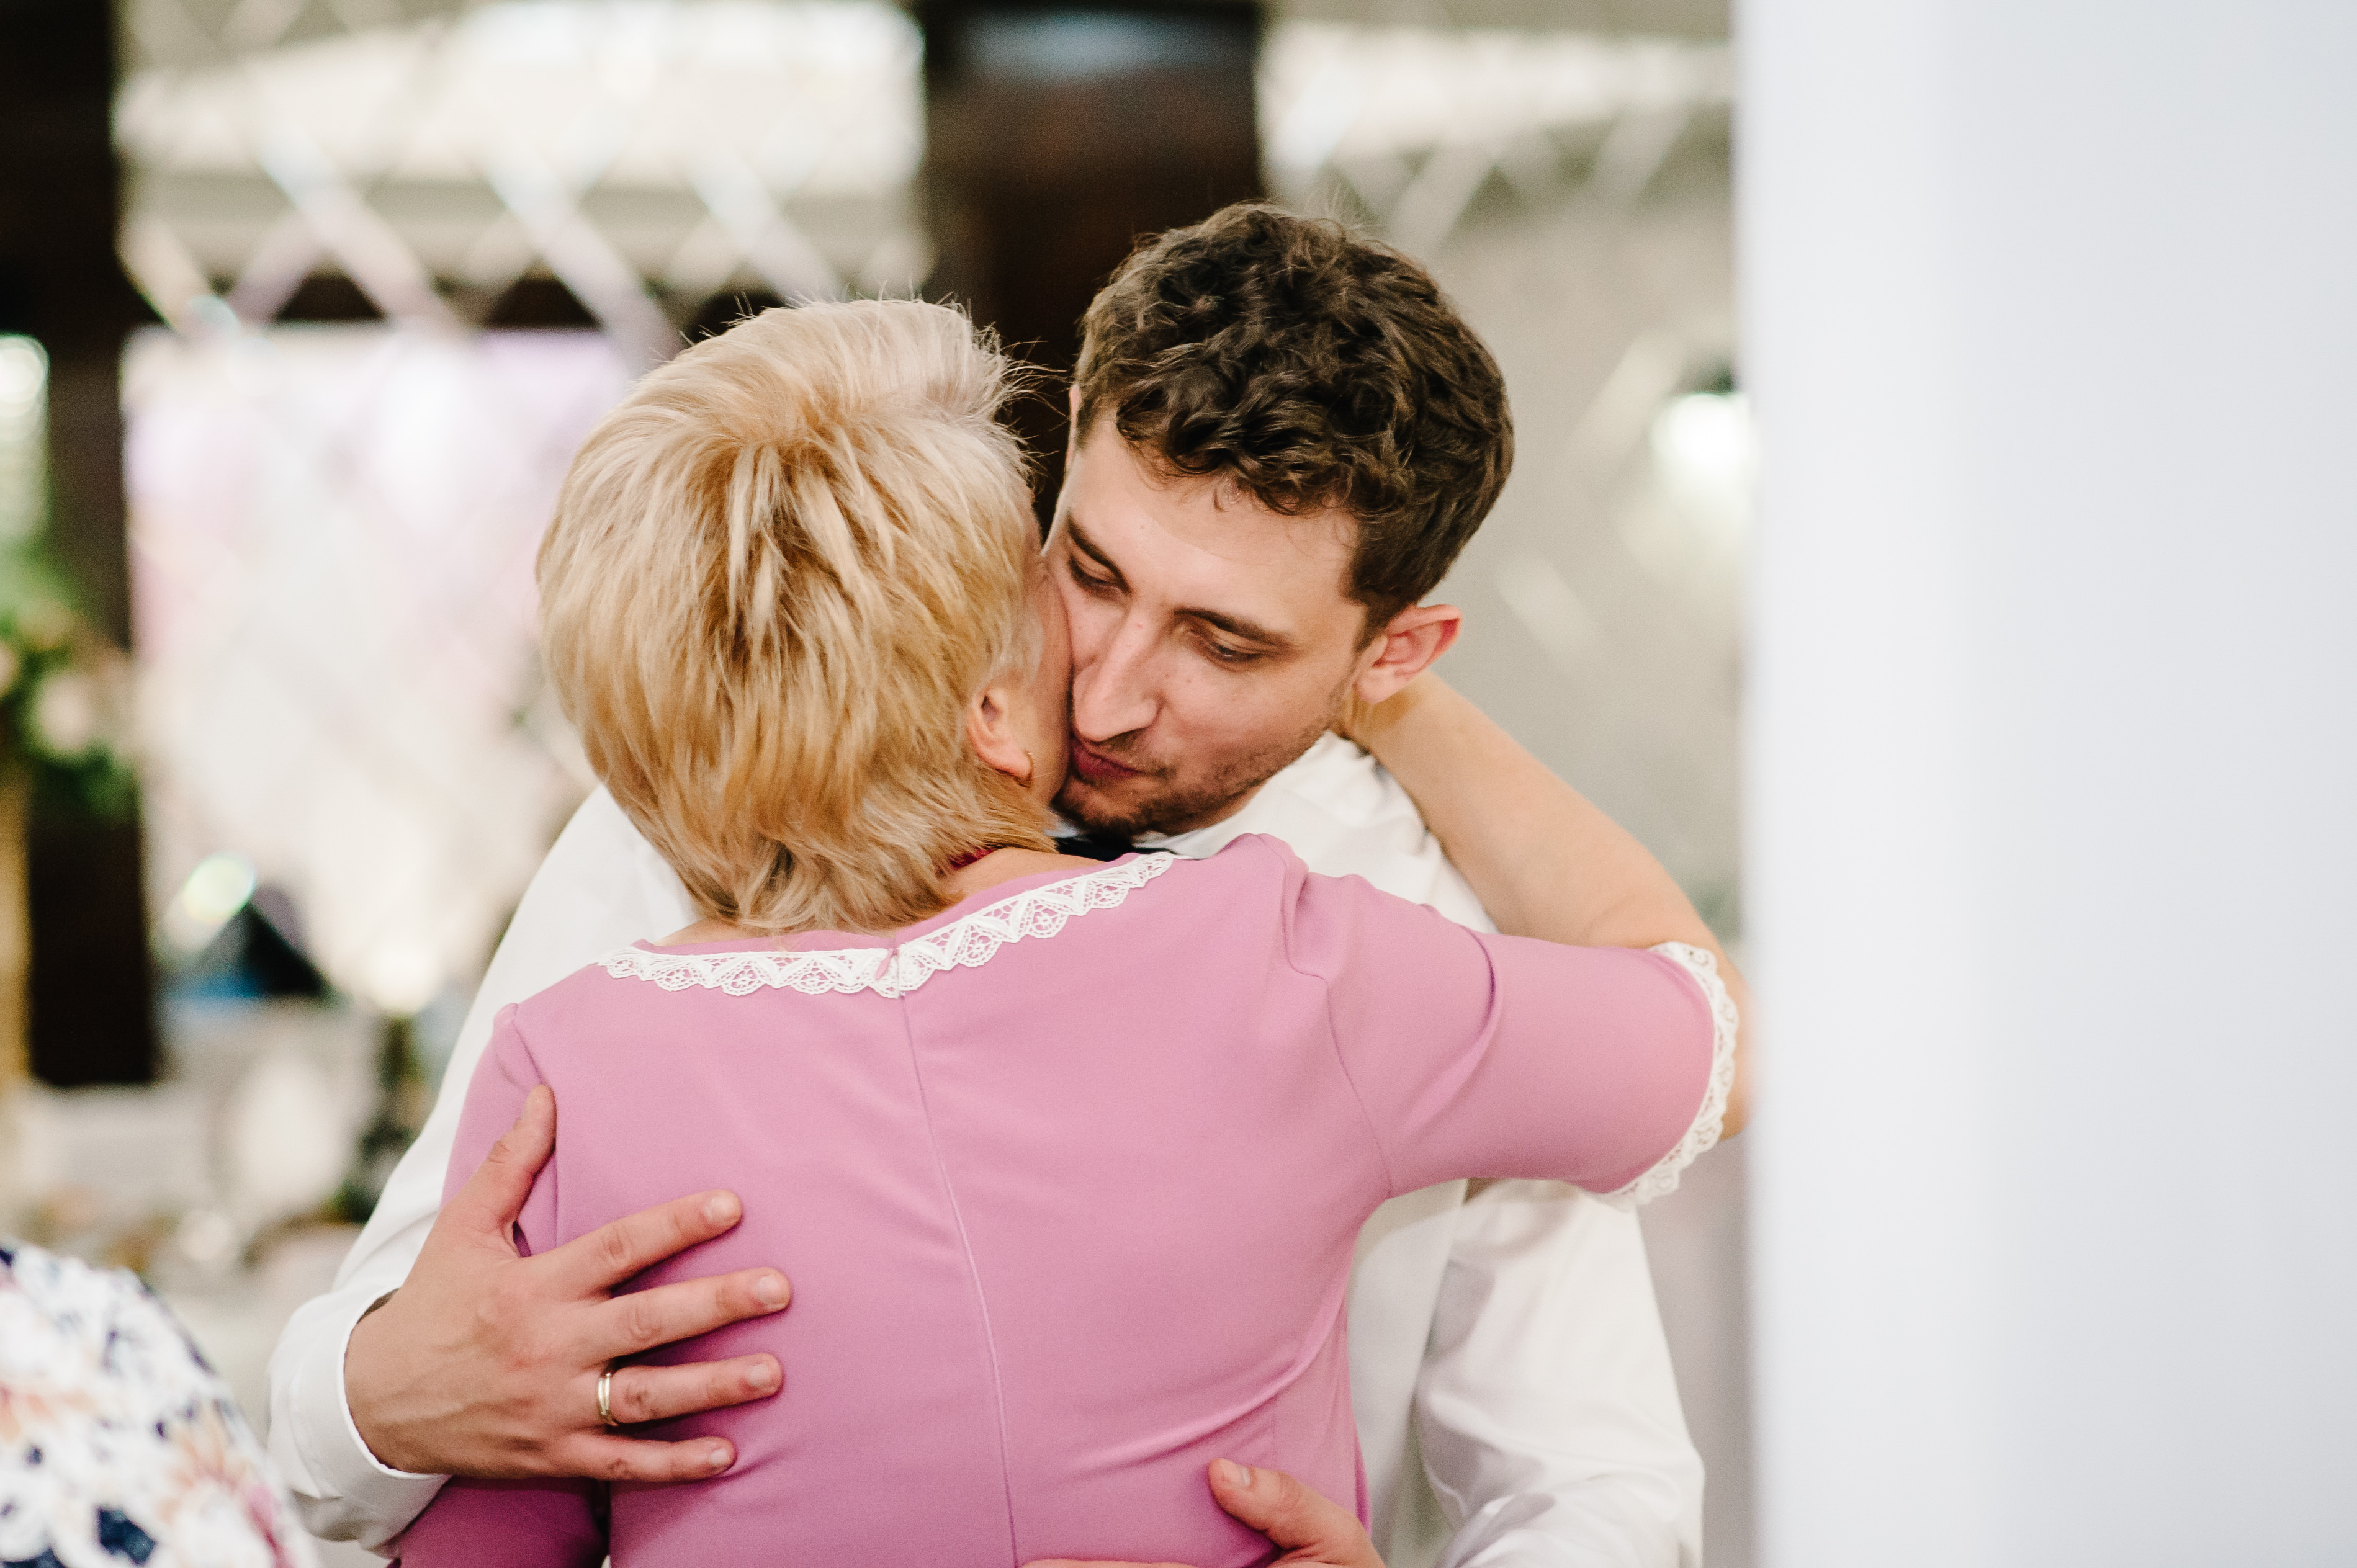 A man kissing his mother on the cheek | Source: Shutterstock